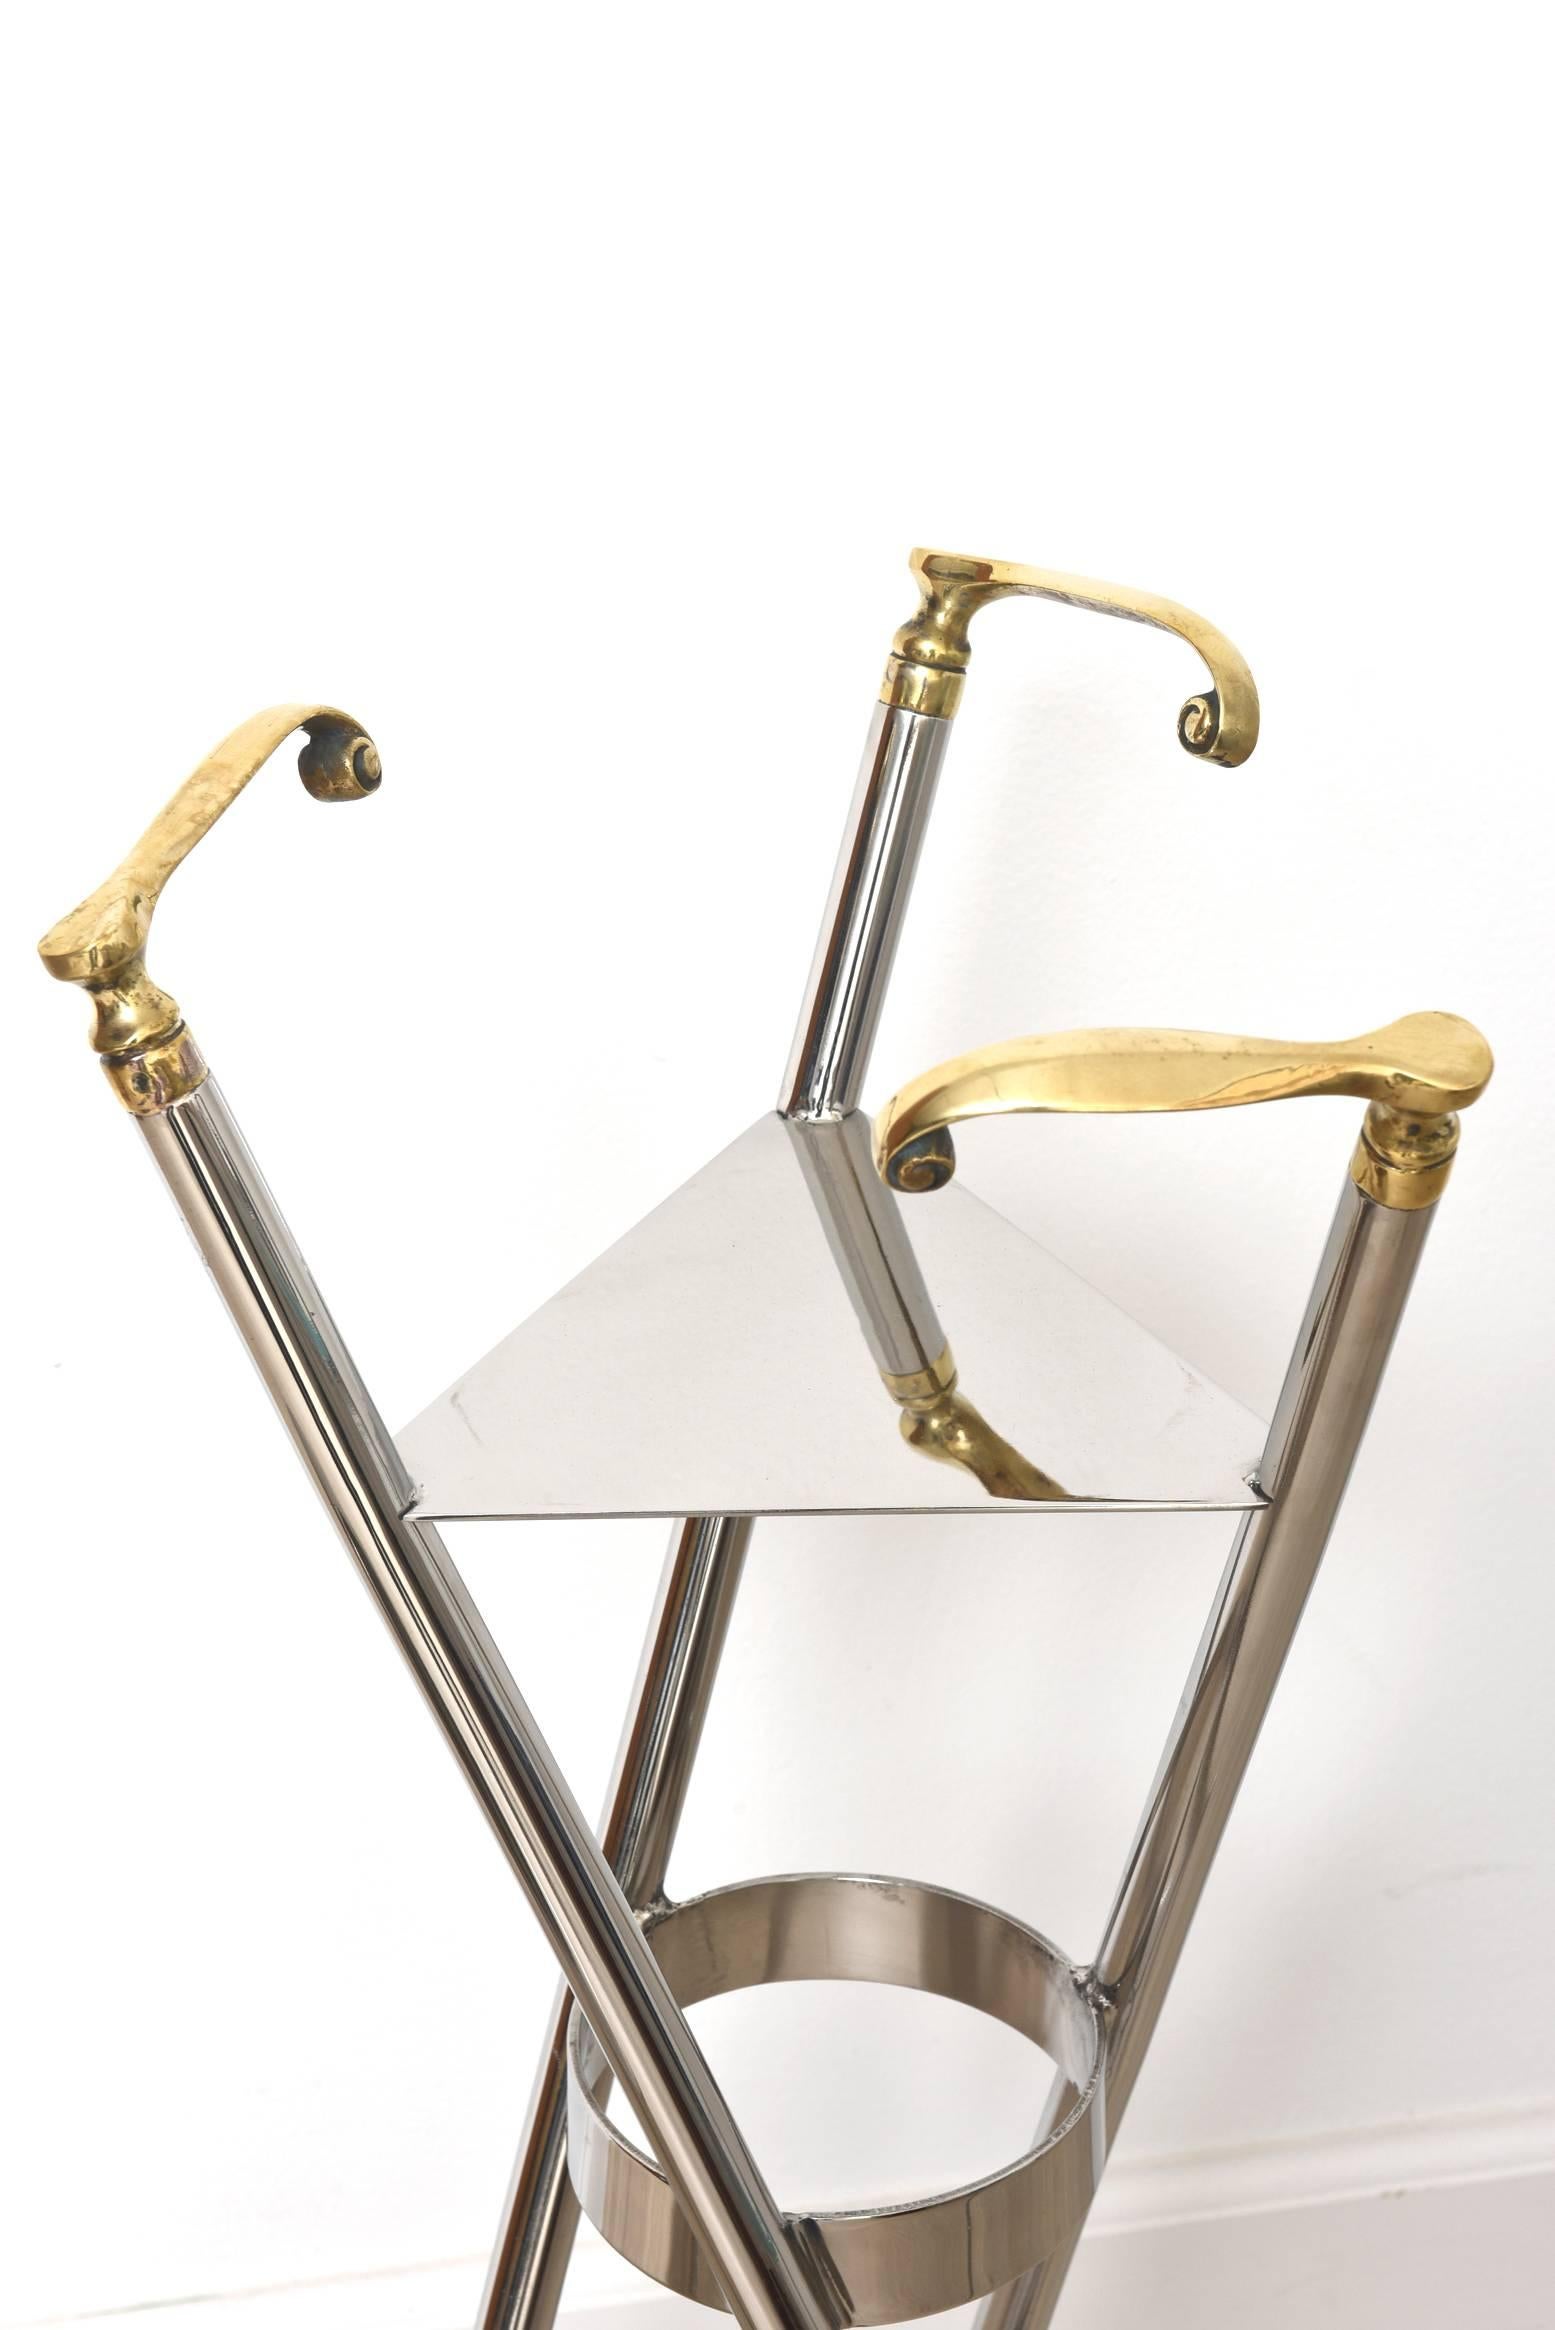 20th Century Mid-Century Chrome and Brass Top Hat and Cane Champaign Bucket or Wine Cooler